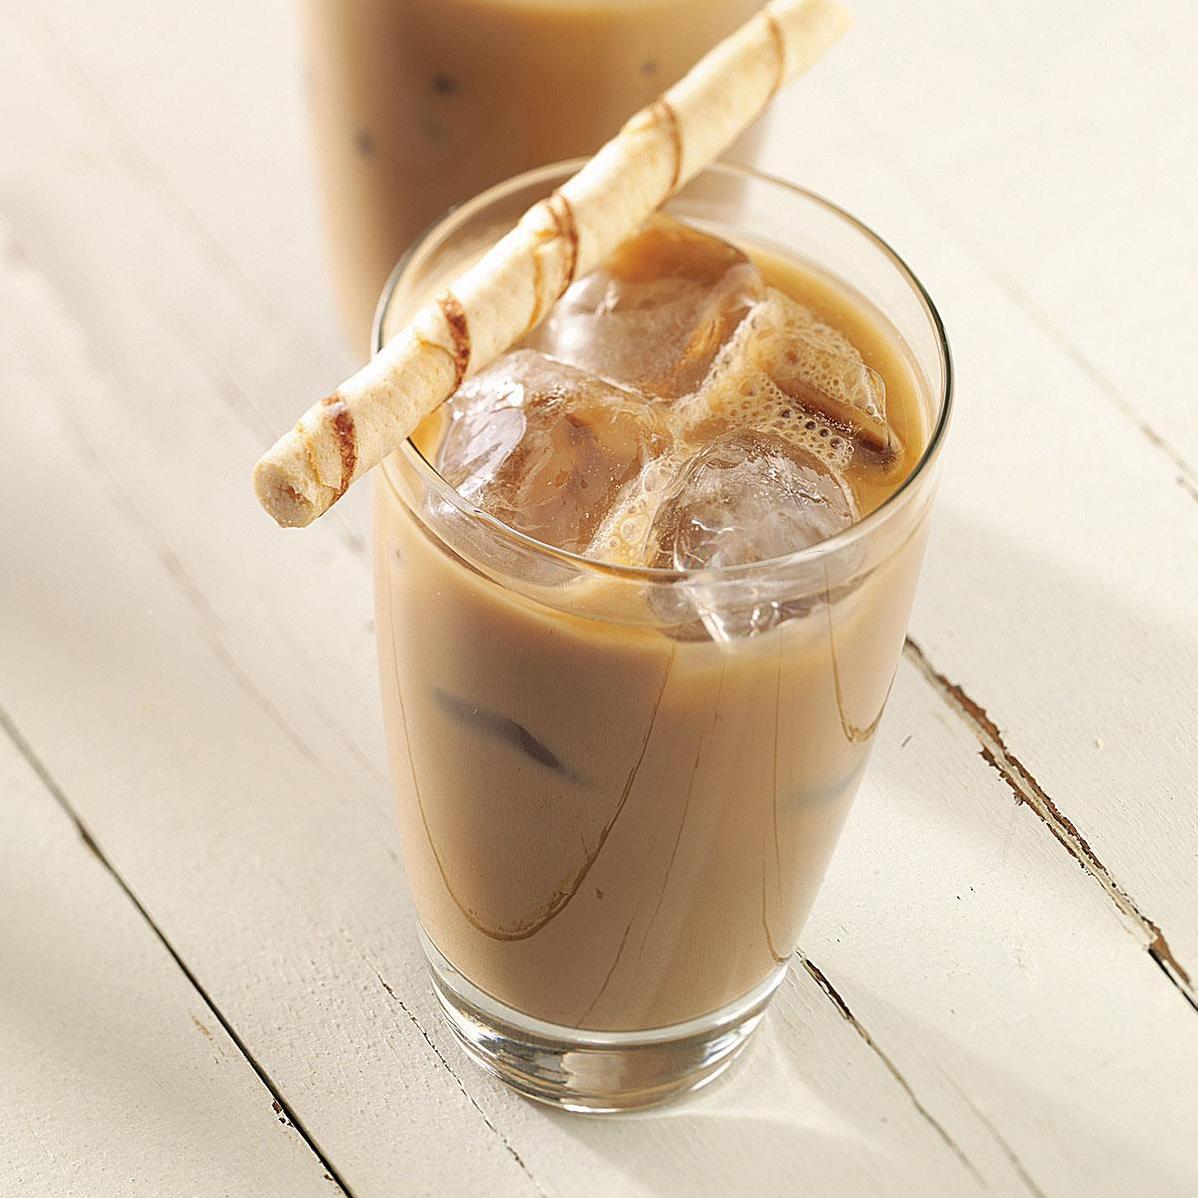  A perfect balance of coffee, milk, and ice